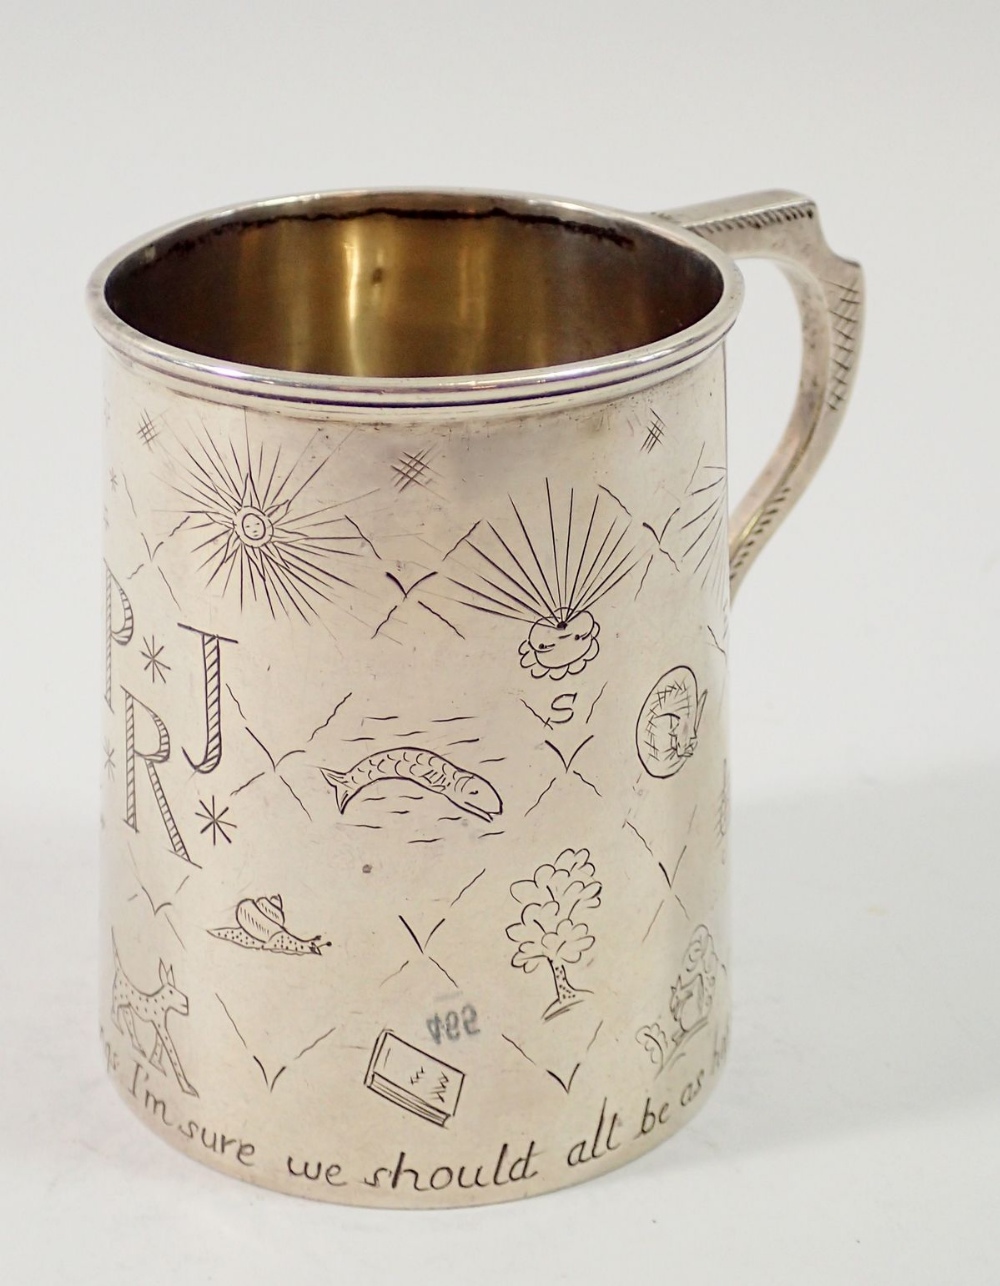 A silver christening mug with engraved scattered nursery motifs, by Robert Pringle & Sons, London - Image 2 of 3